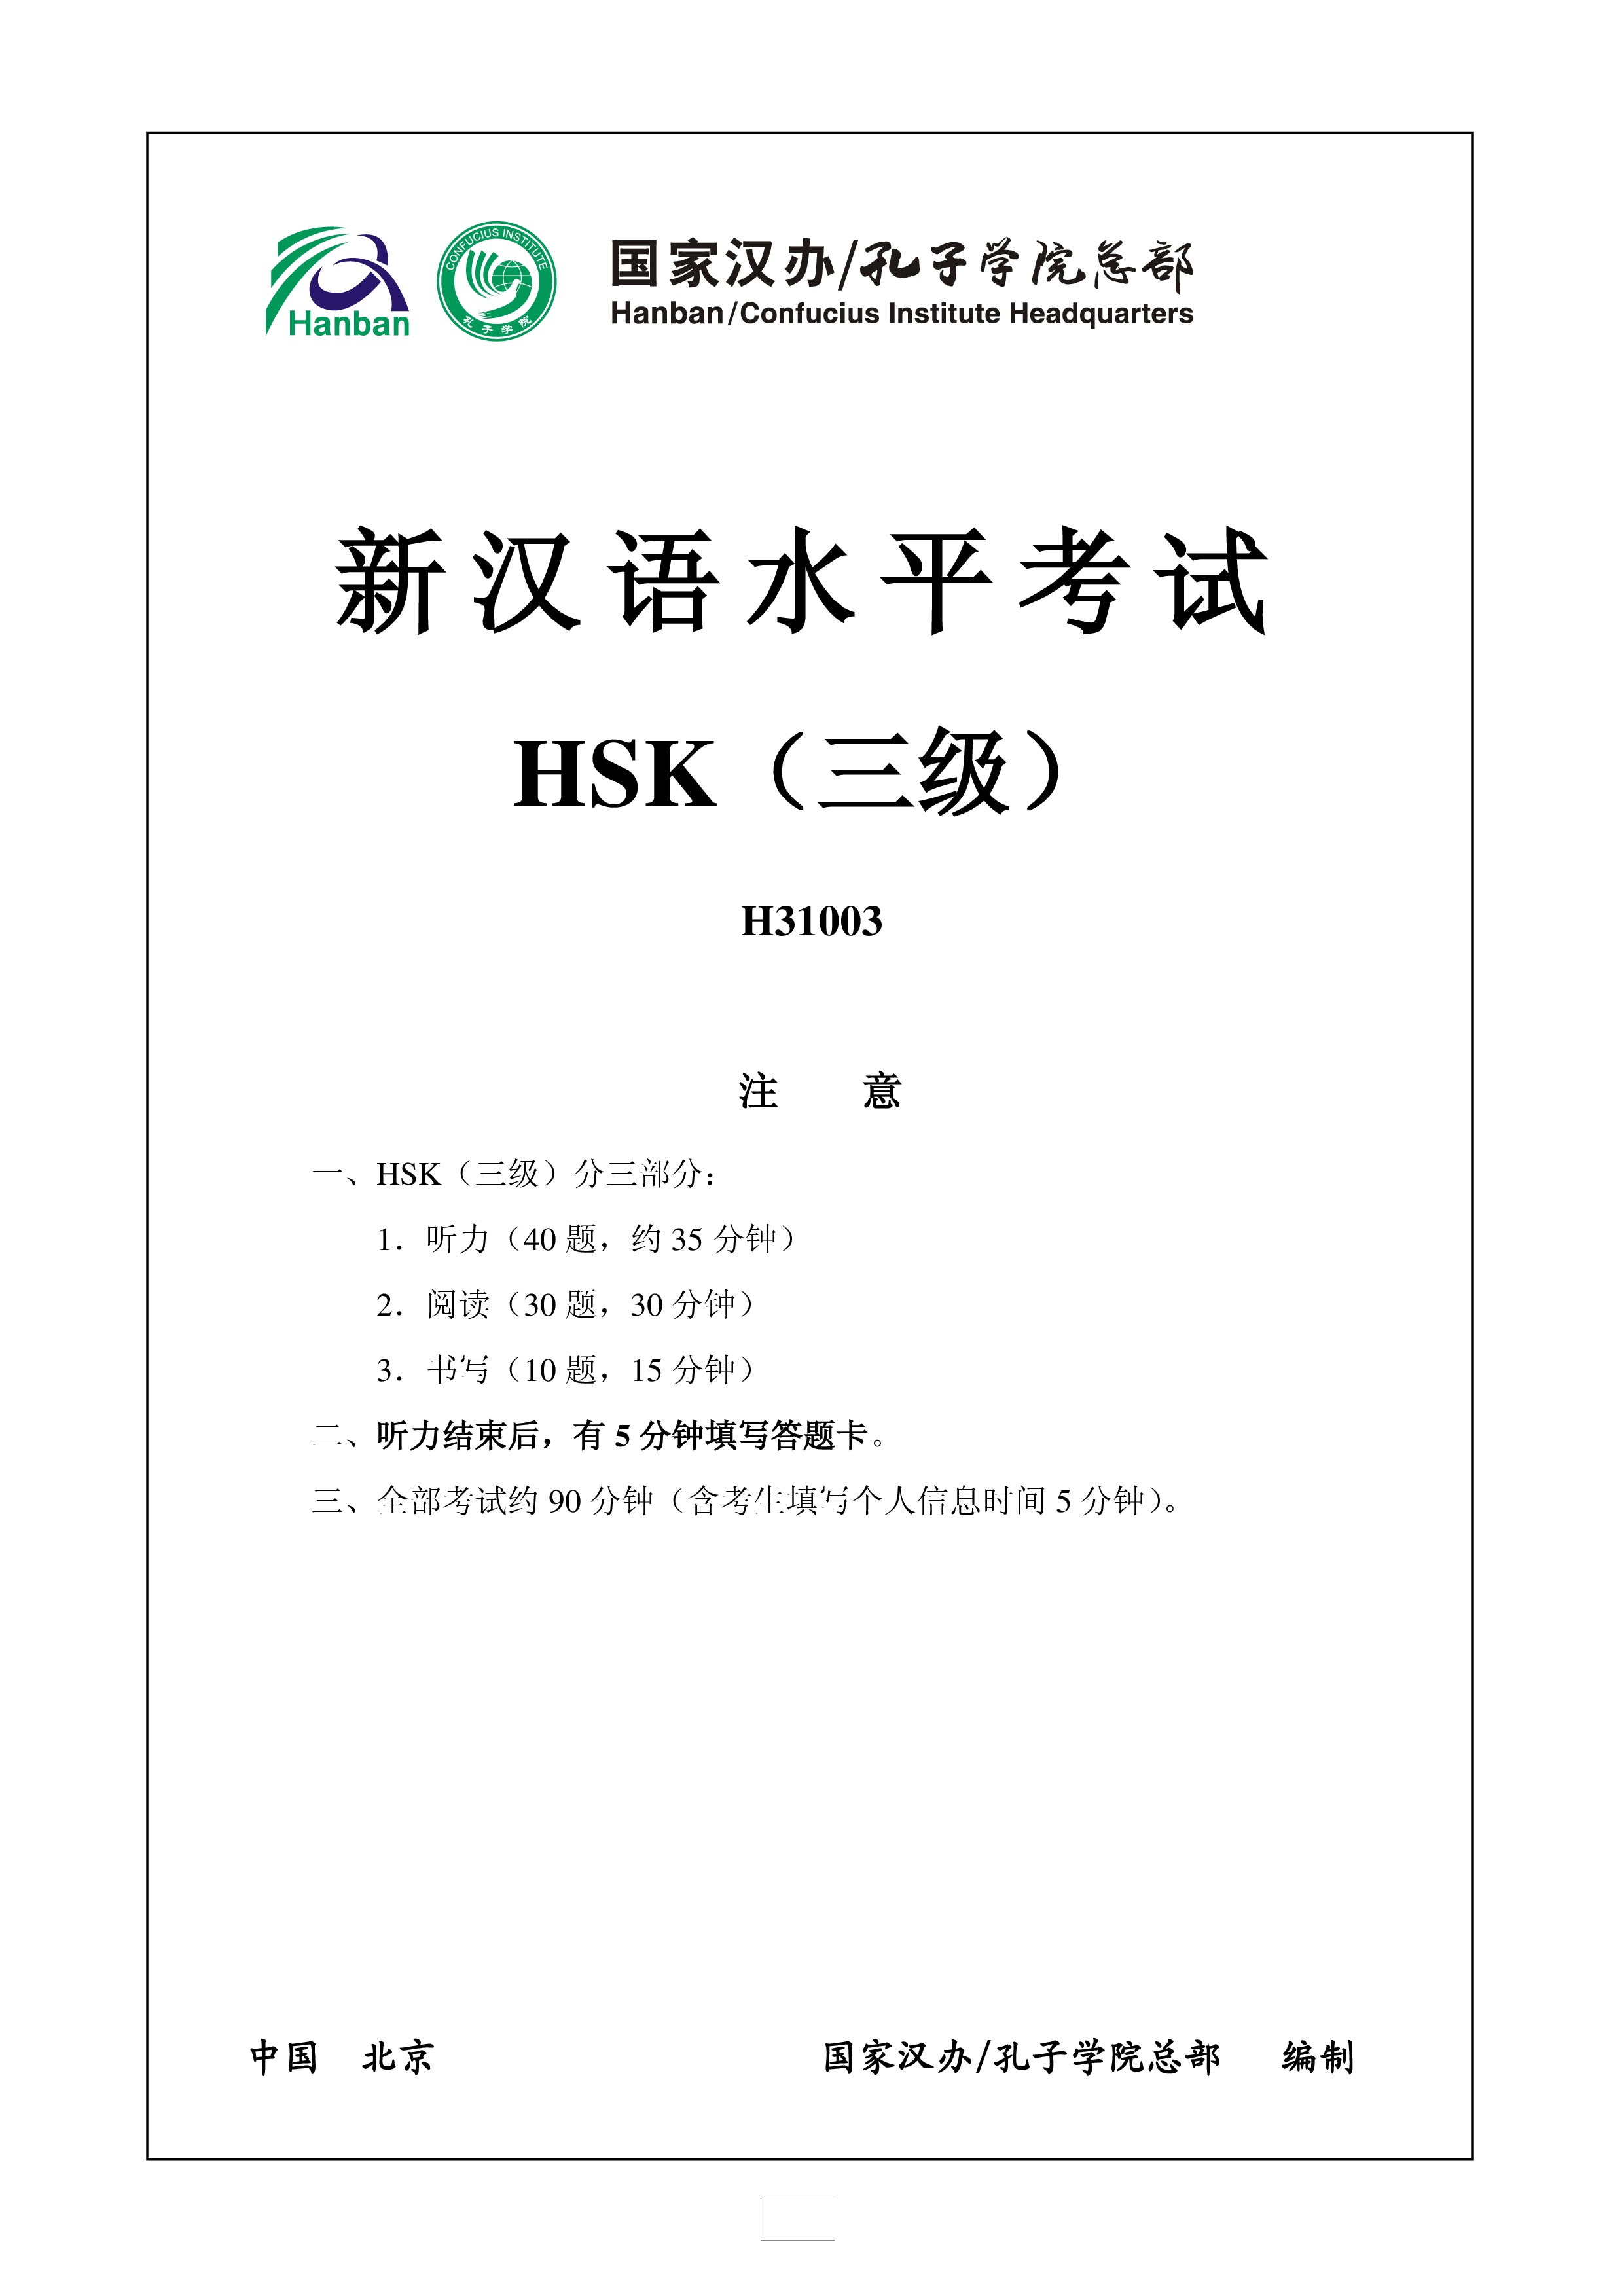 hsk3 chinese exam including answers hsk3 h31003 template